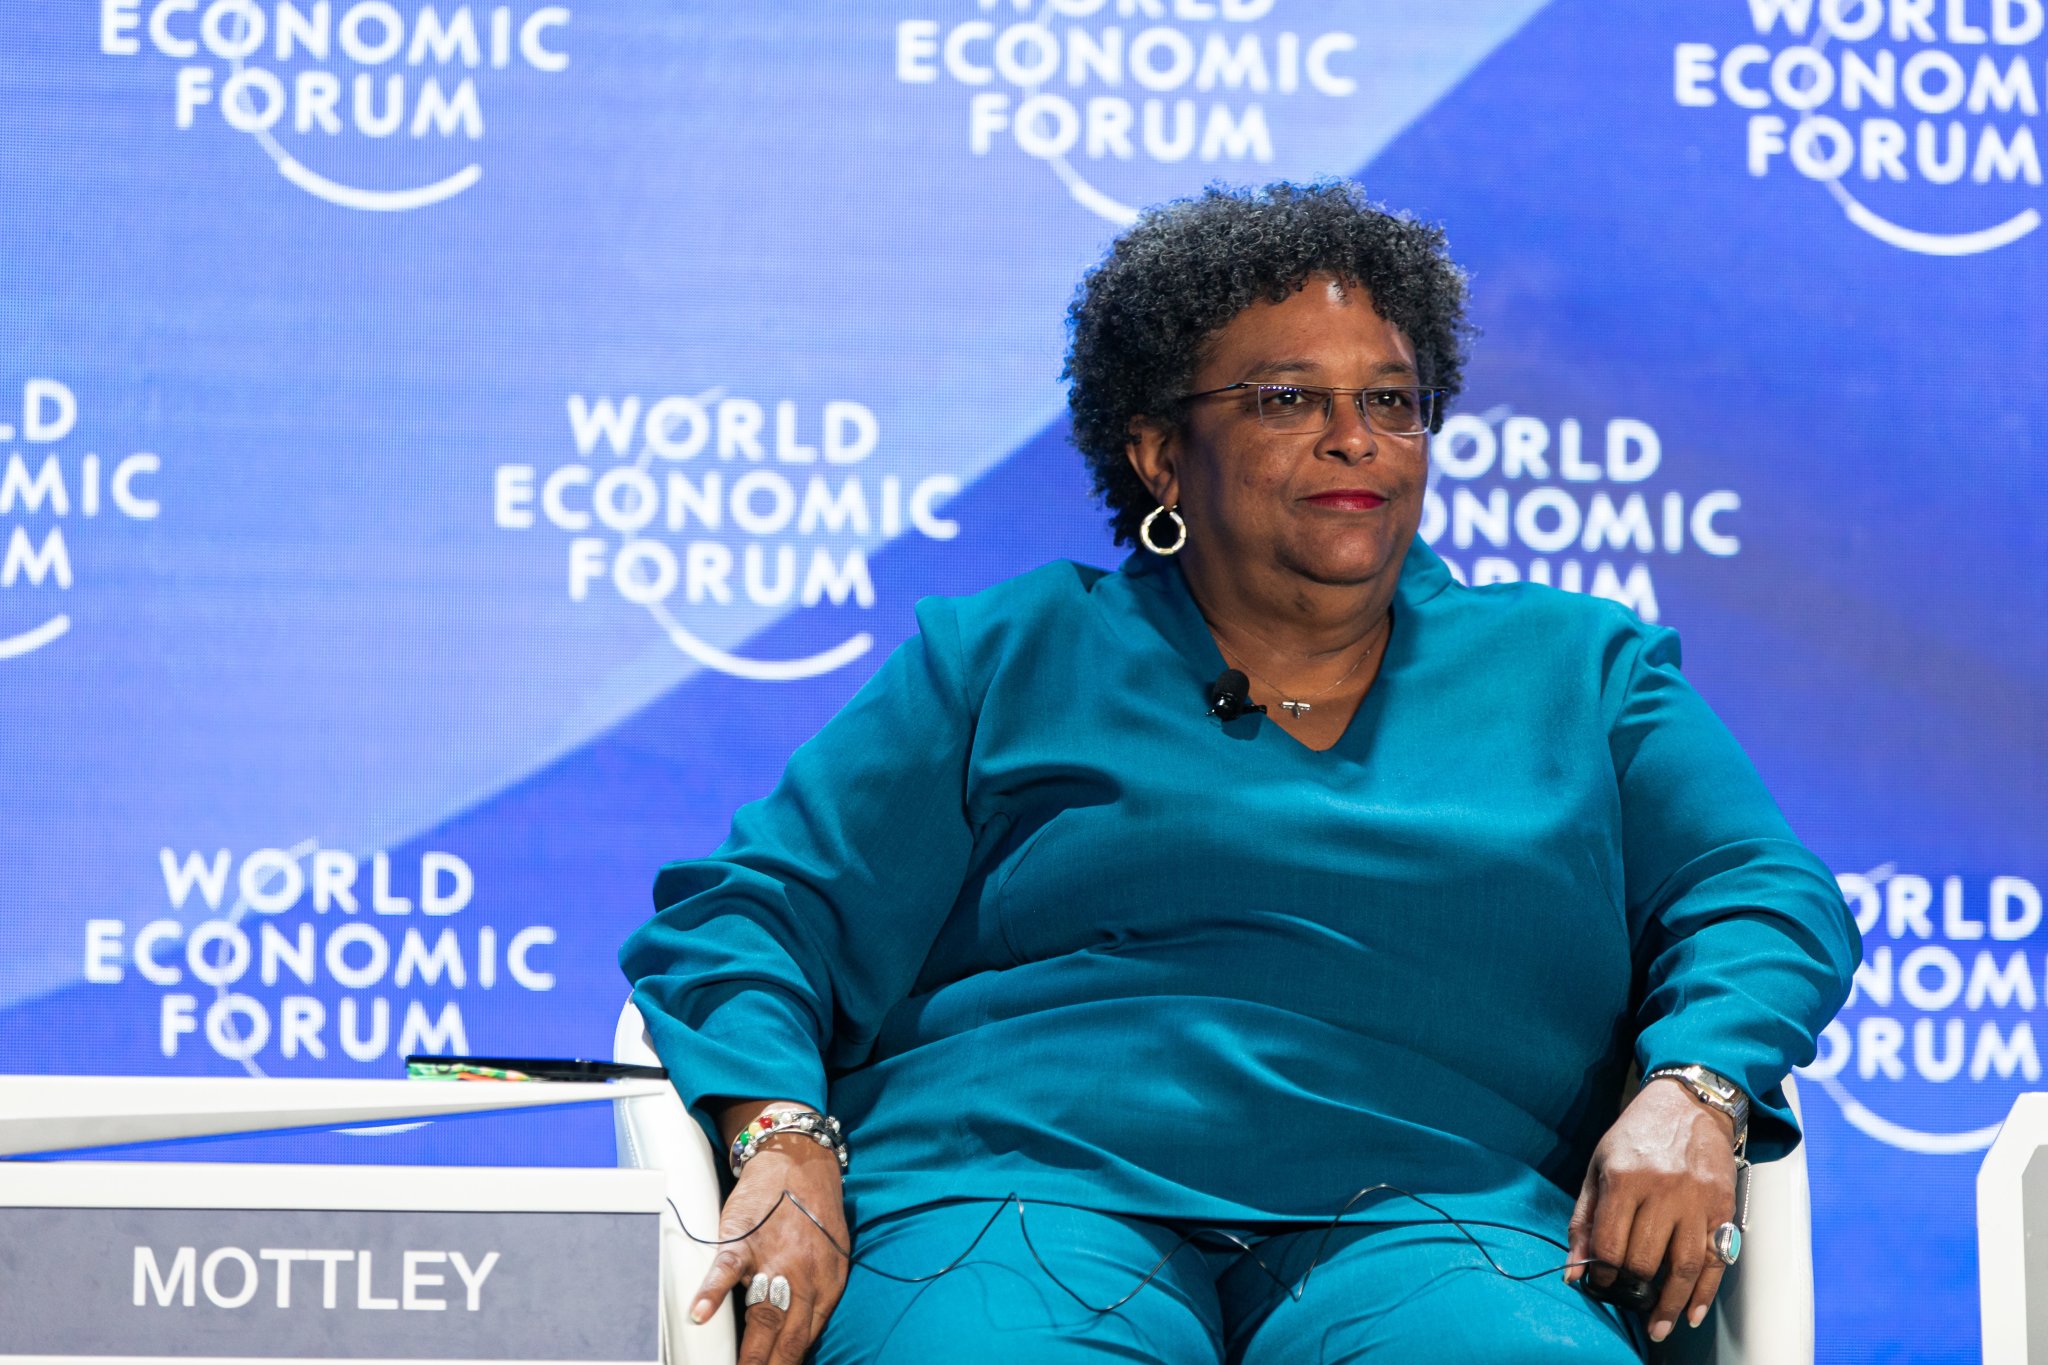 AMNC 2023: Prime Minister of Barbados calls for ‘urgent action’ on climate crisis